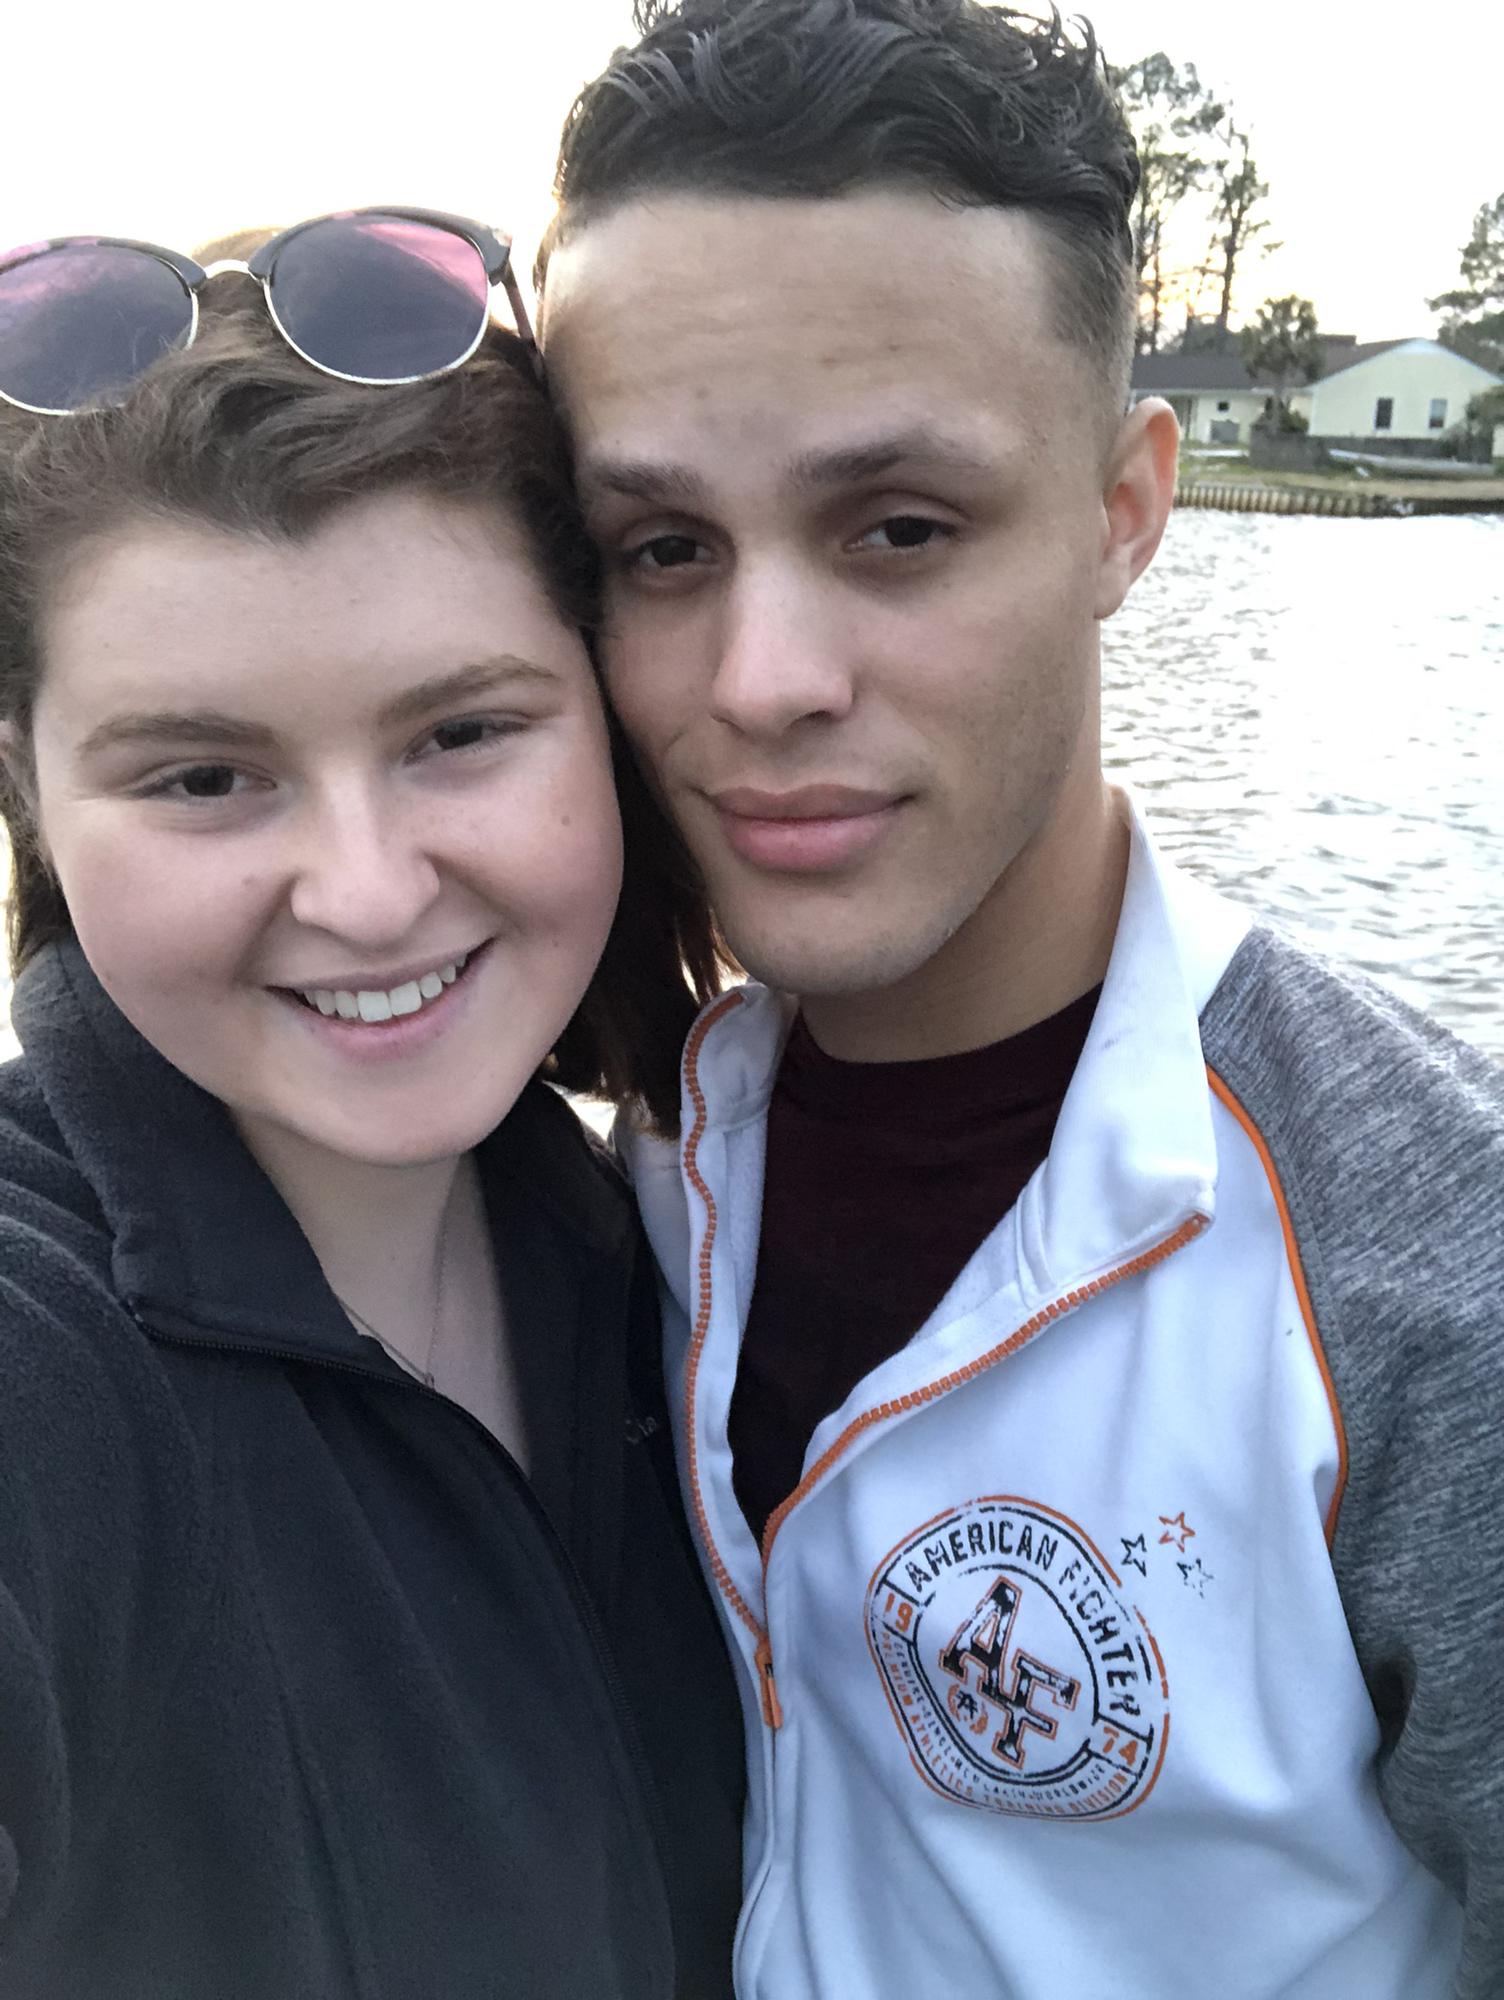 Spring break in NC with Keire ☀️ we found an amazing view at a local park. March 14, 2019